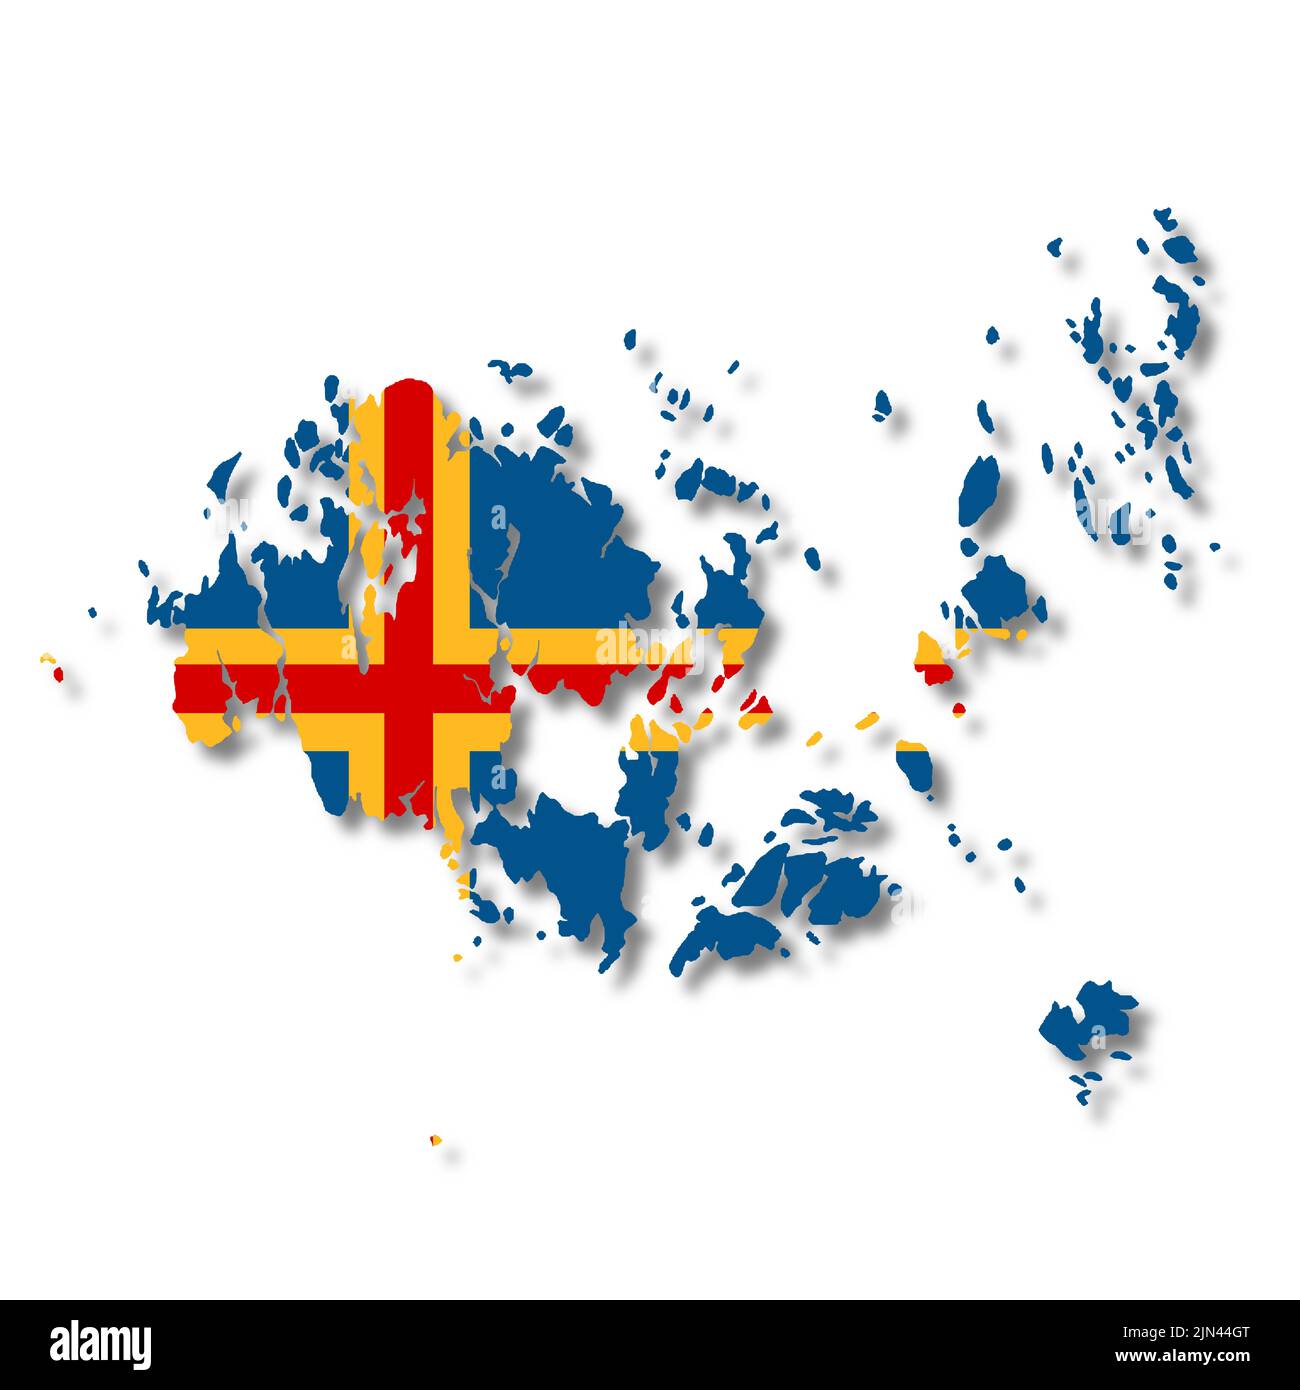 Aland Islands flag map 3d illustration on white with clipping path Stock Photo